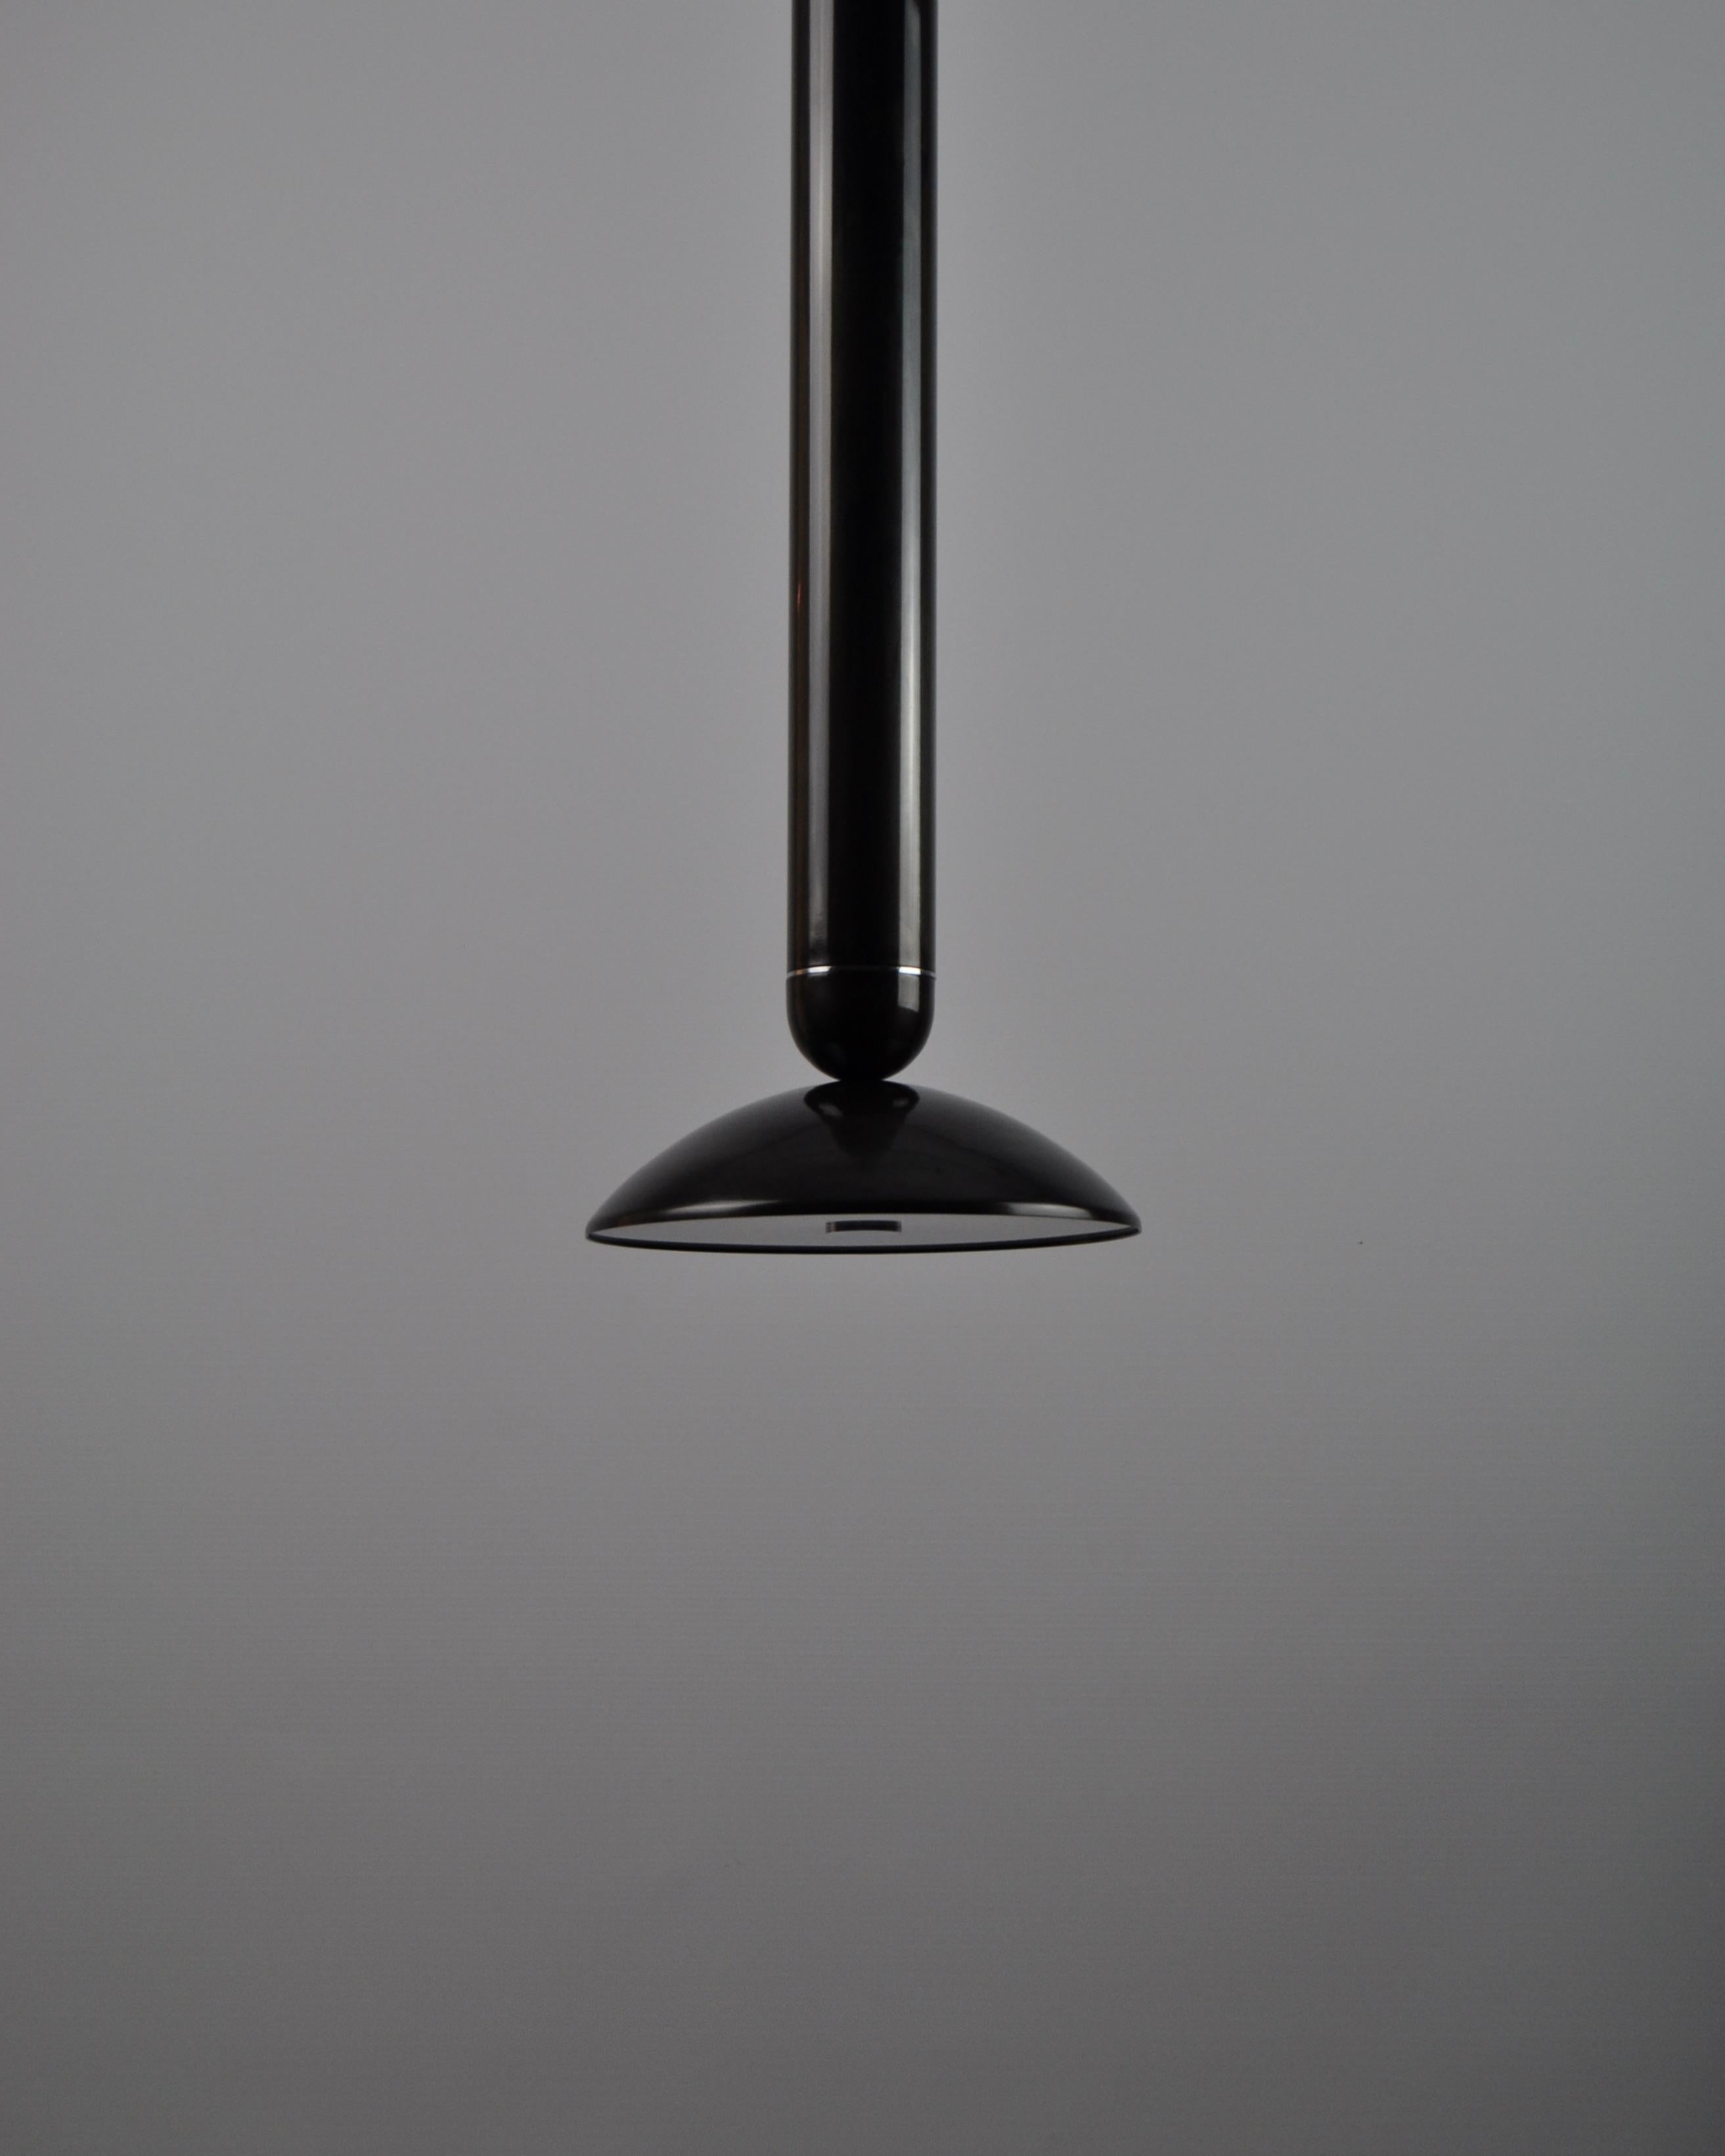 The Rone range is an exploration of the delicate balance of classic forms. In simplicity, quality is at the utmost importance and every part is painstakingly milled or spun before hand-finishing. 

A functional (and replaceable) LED light source